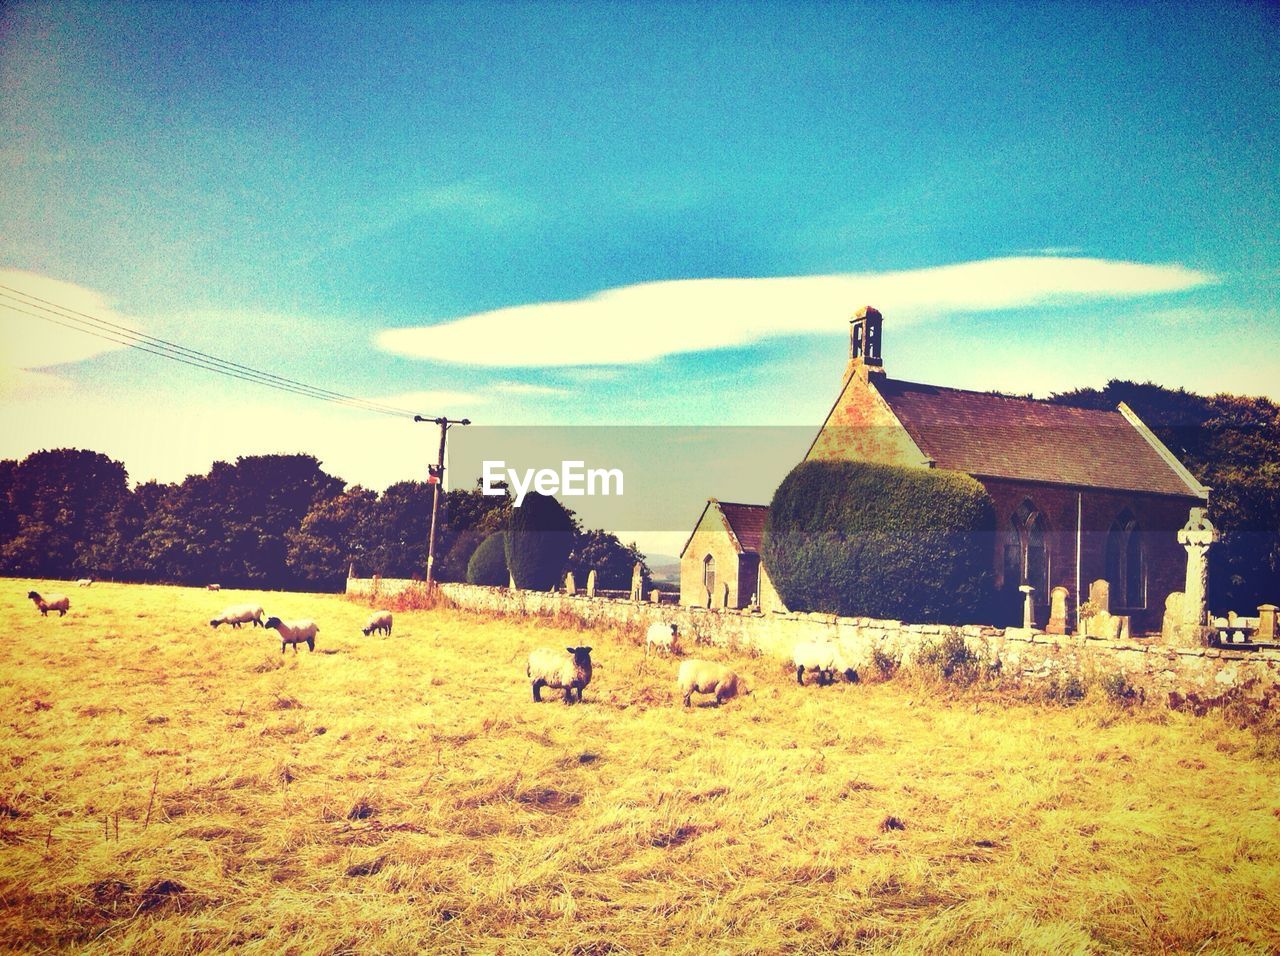 Sheep on field by church against sky